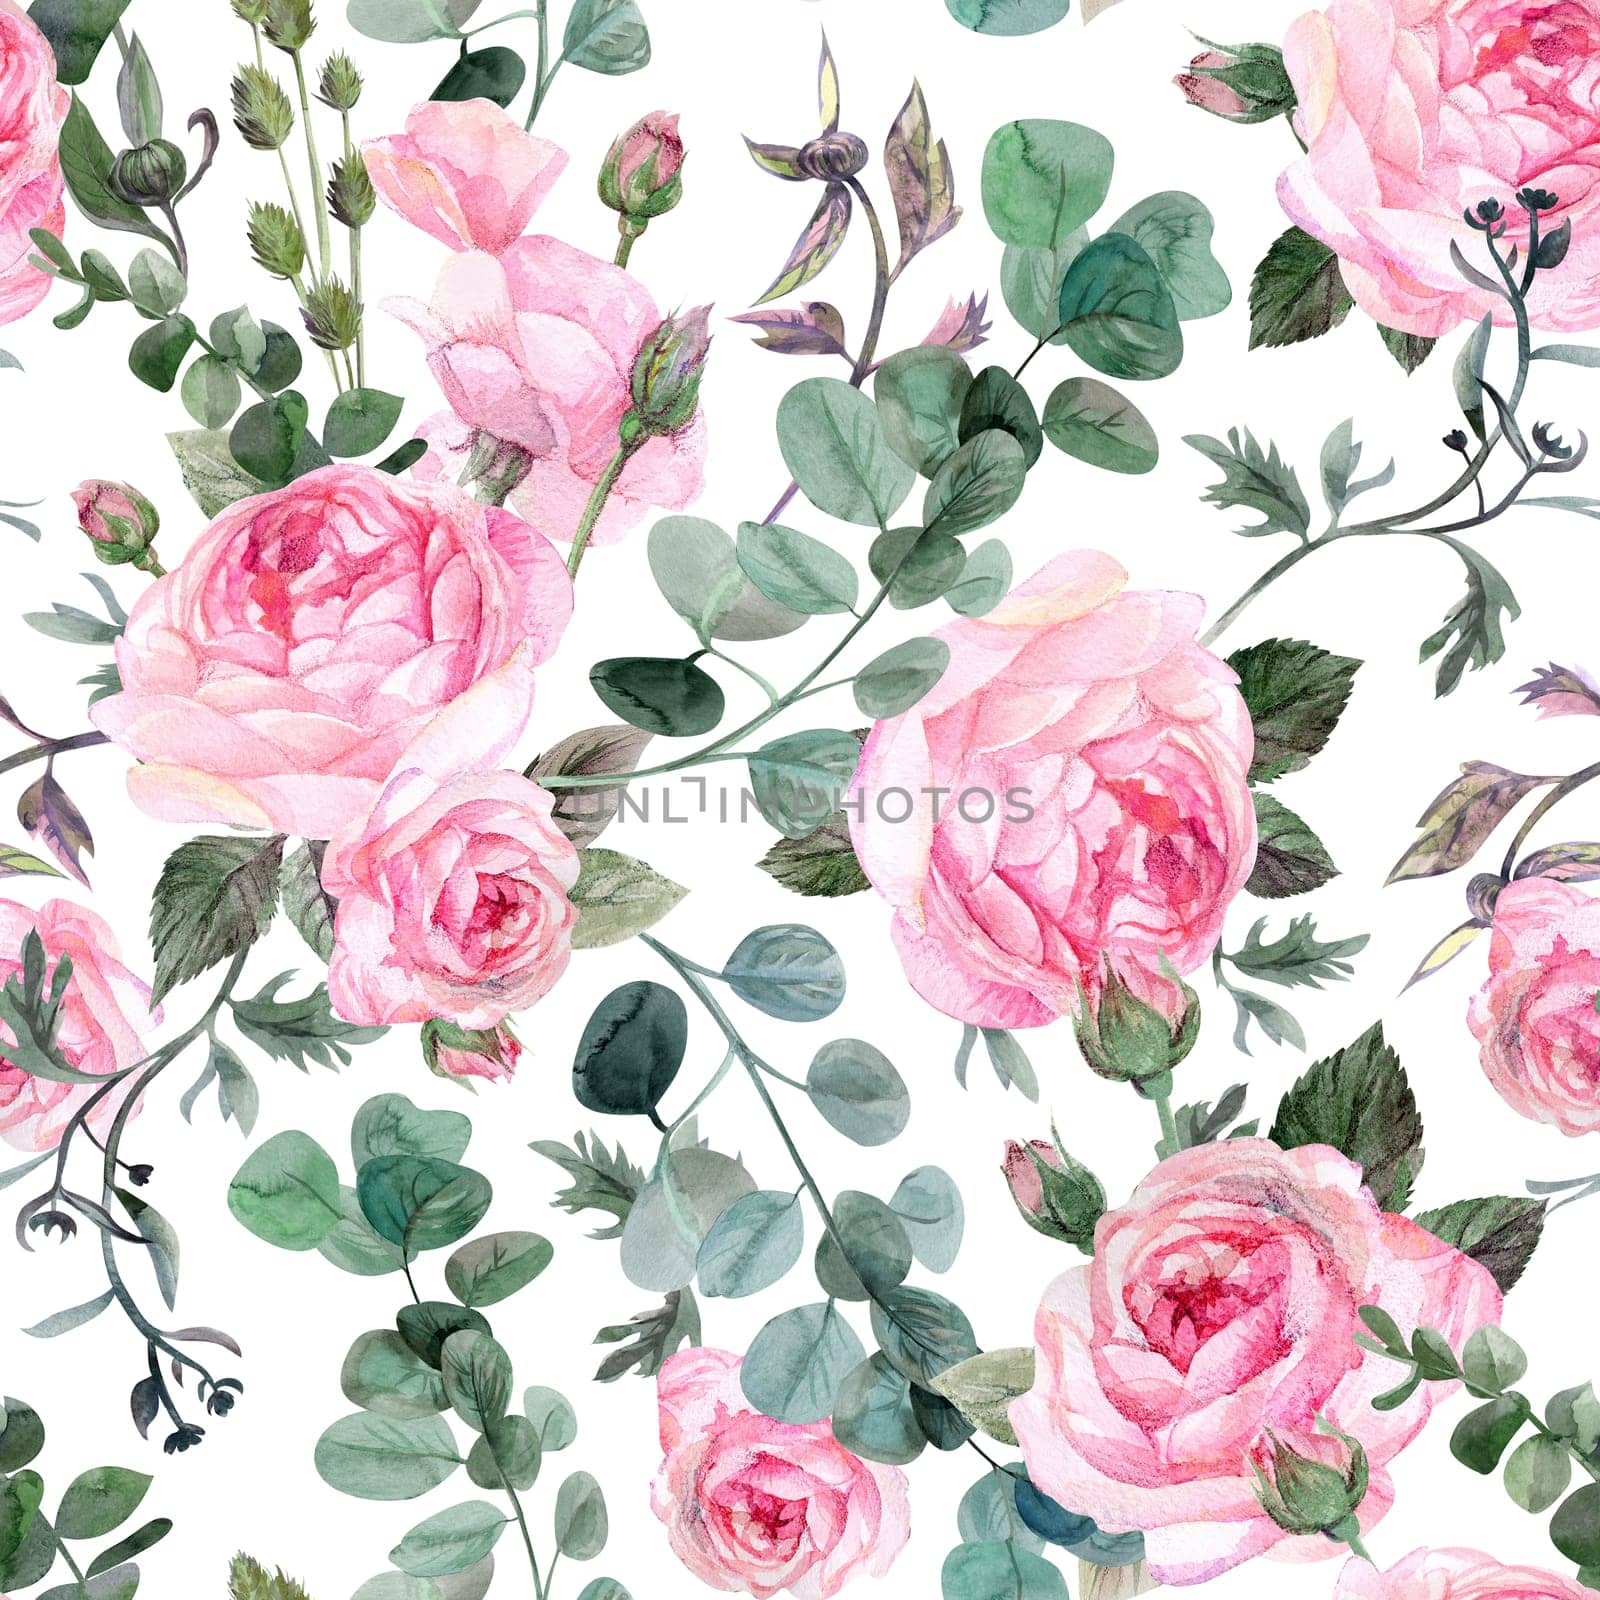 Retro watercolor botanical pattern with bouquets of roses by MarinaVoyush